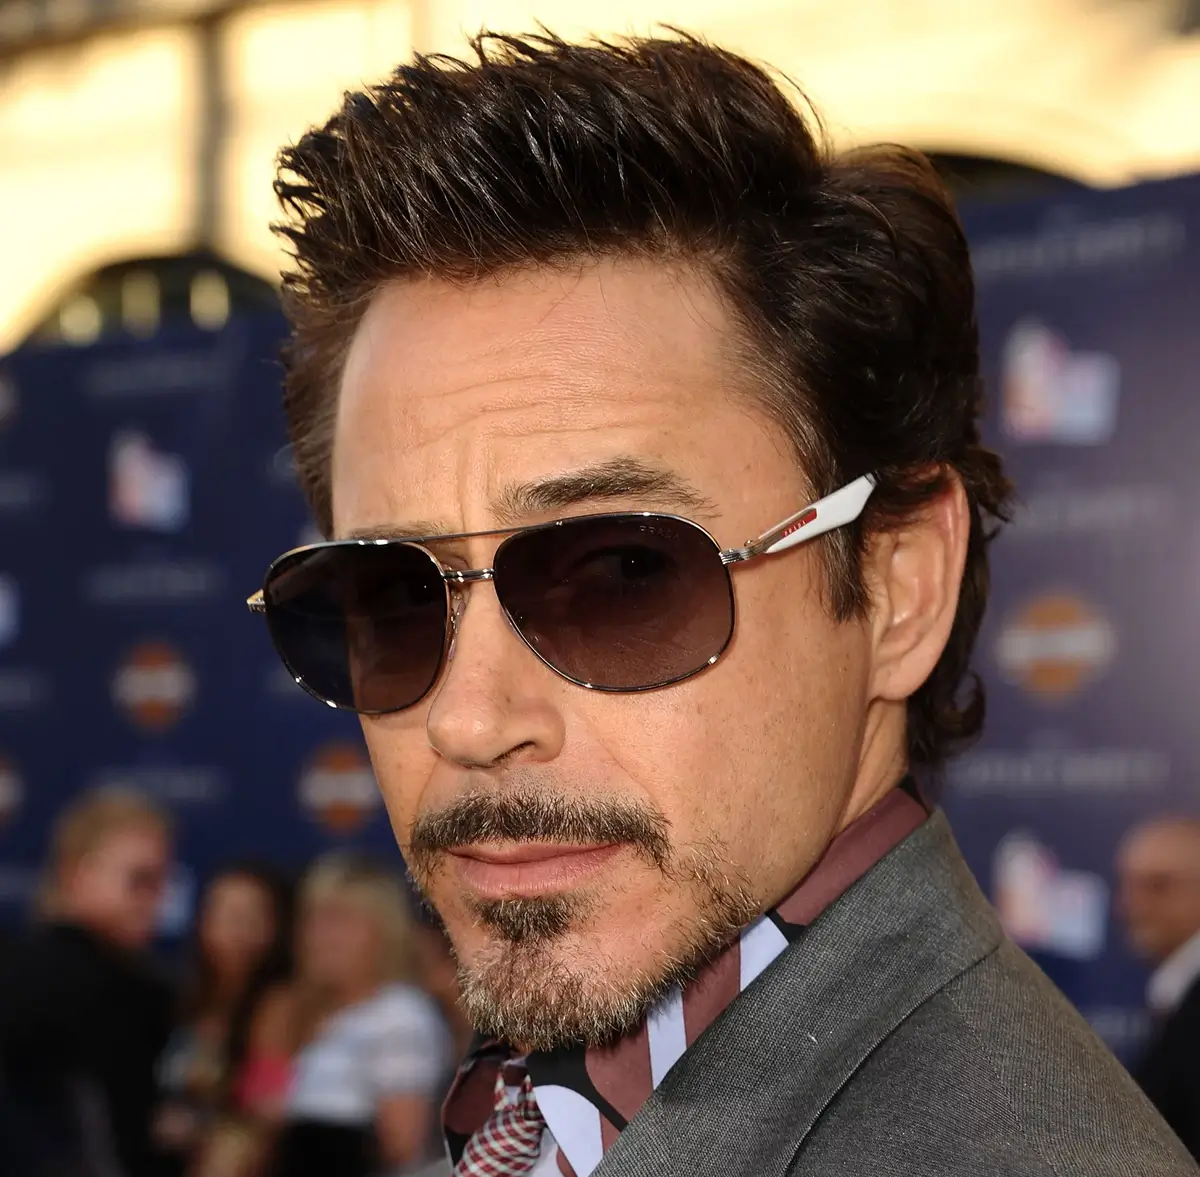 robert downey jr wears aviators that divert attention away from his nose